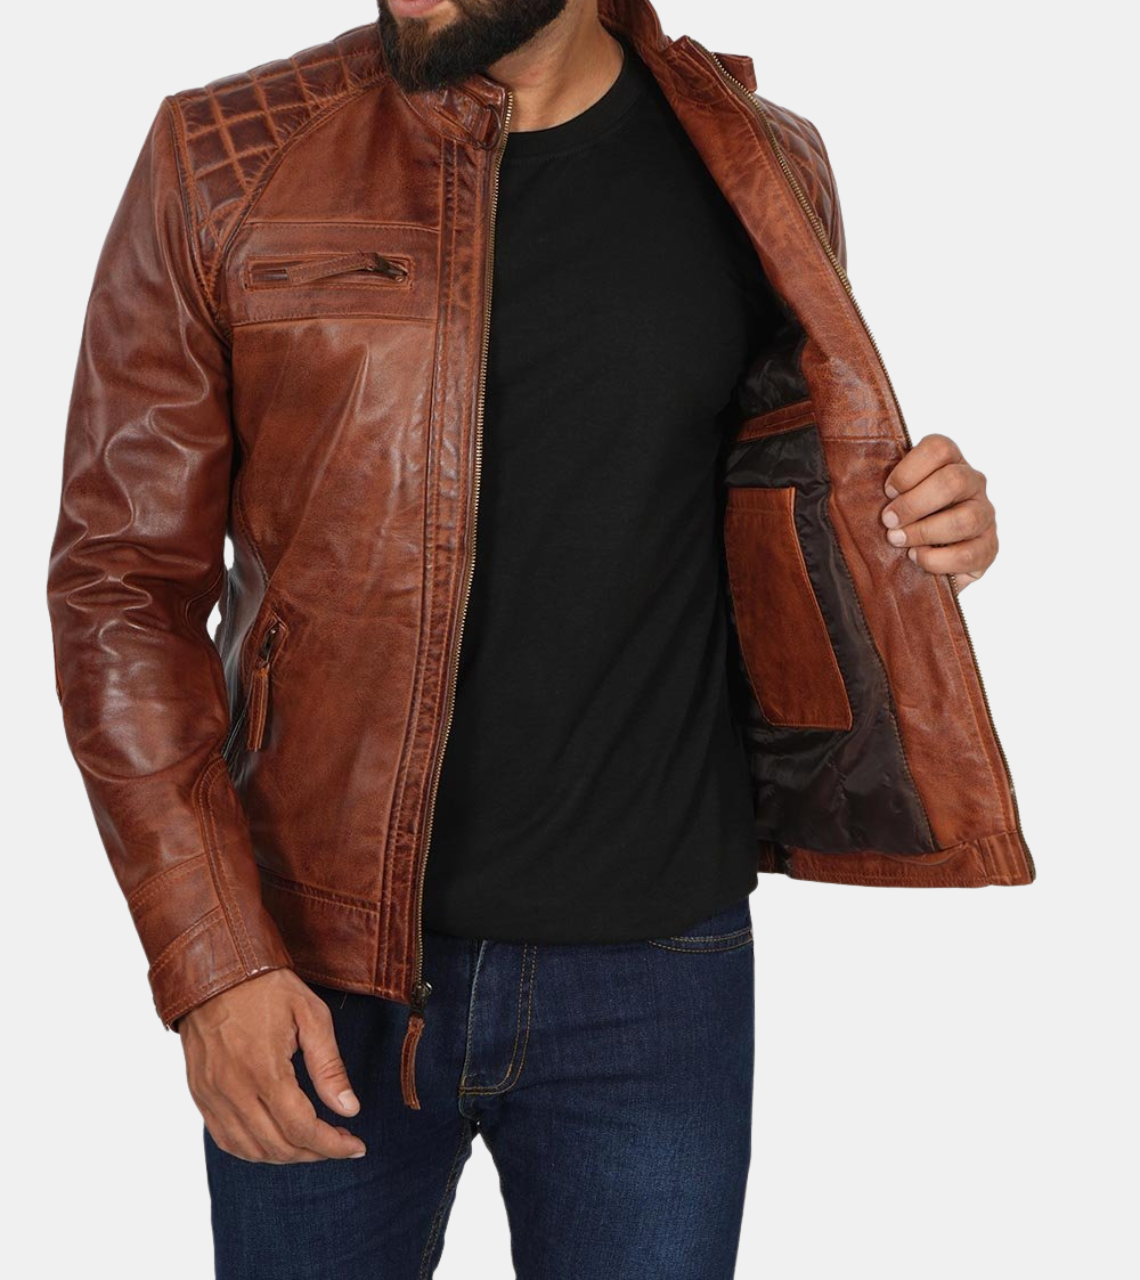 Emory Brown Distressed Leather Jacket For Men's